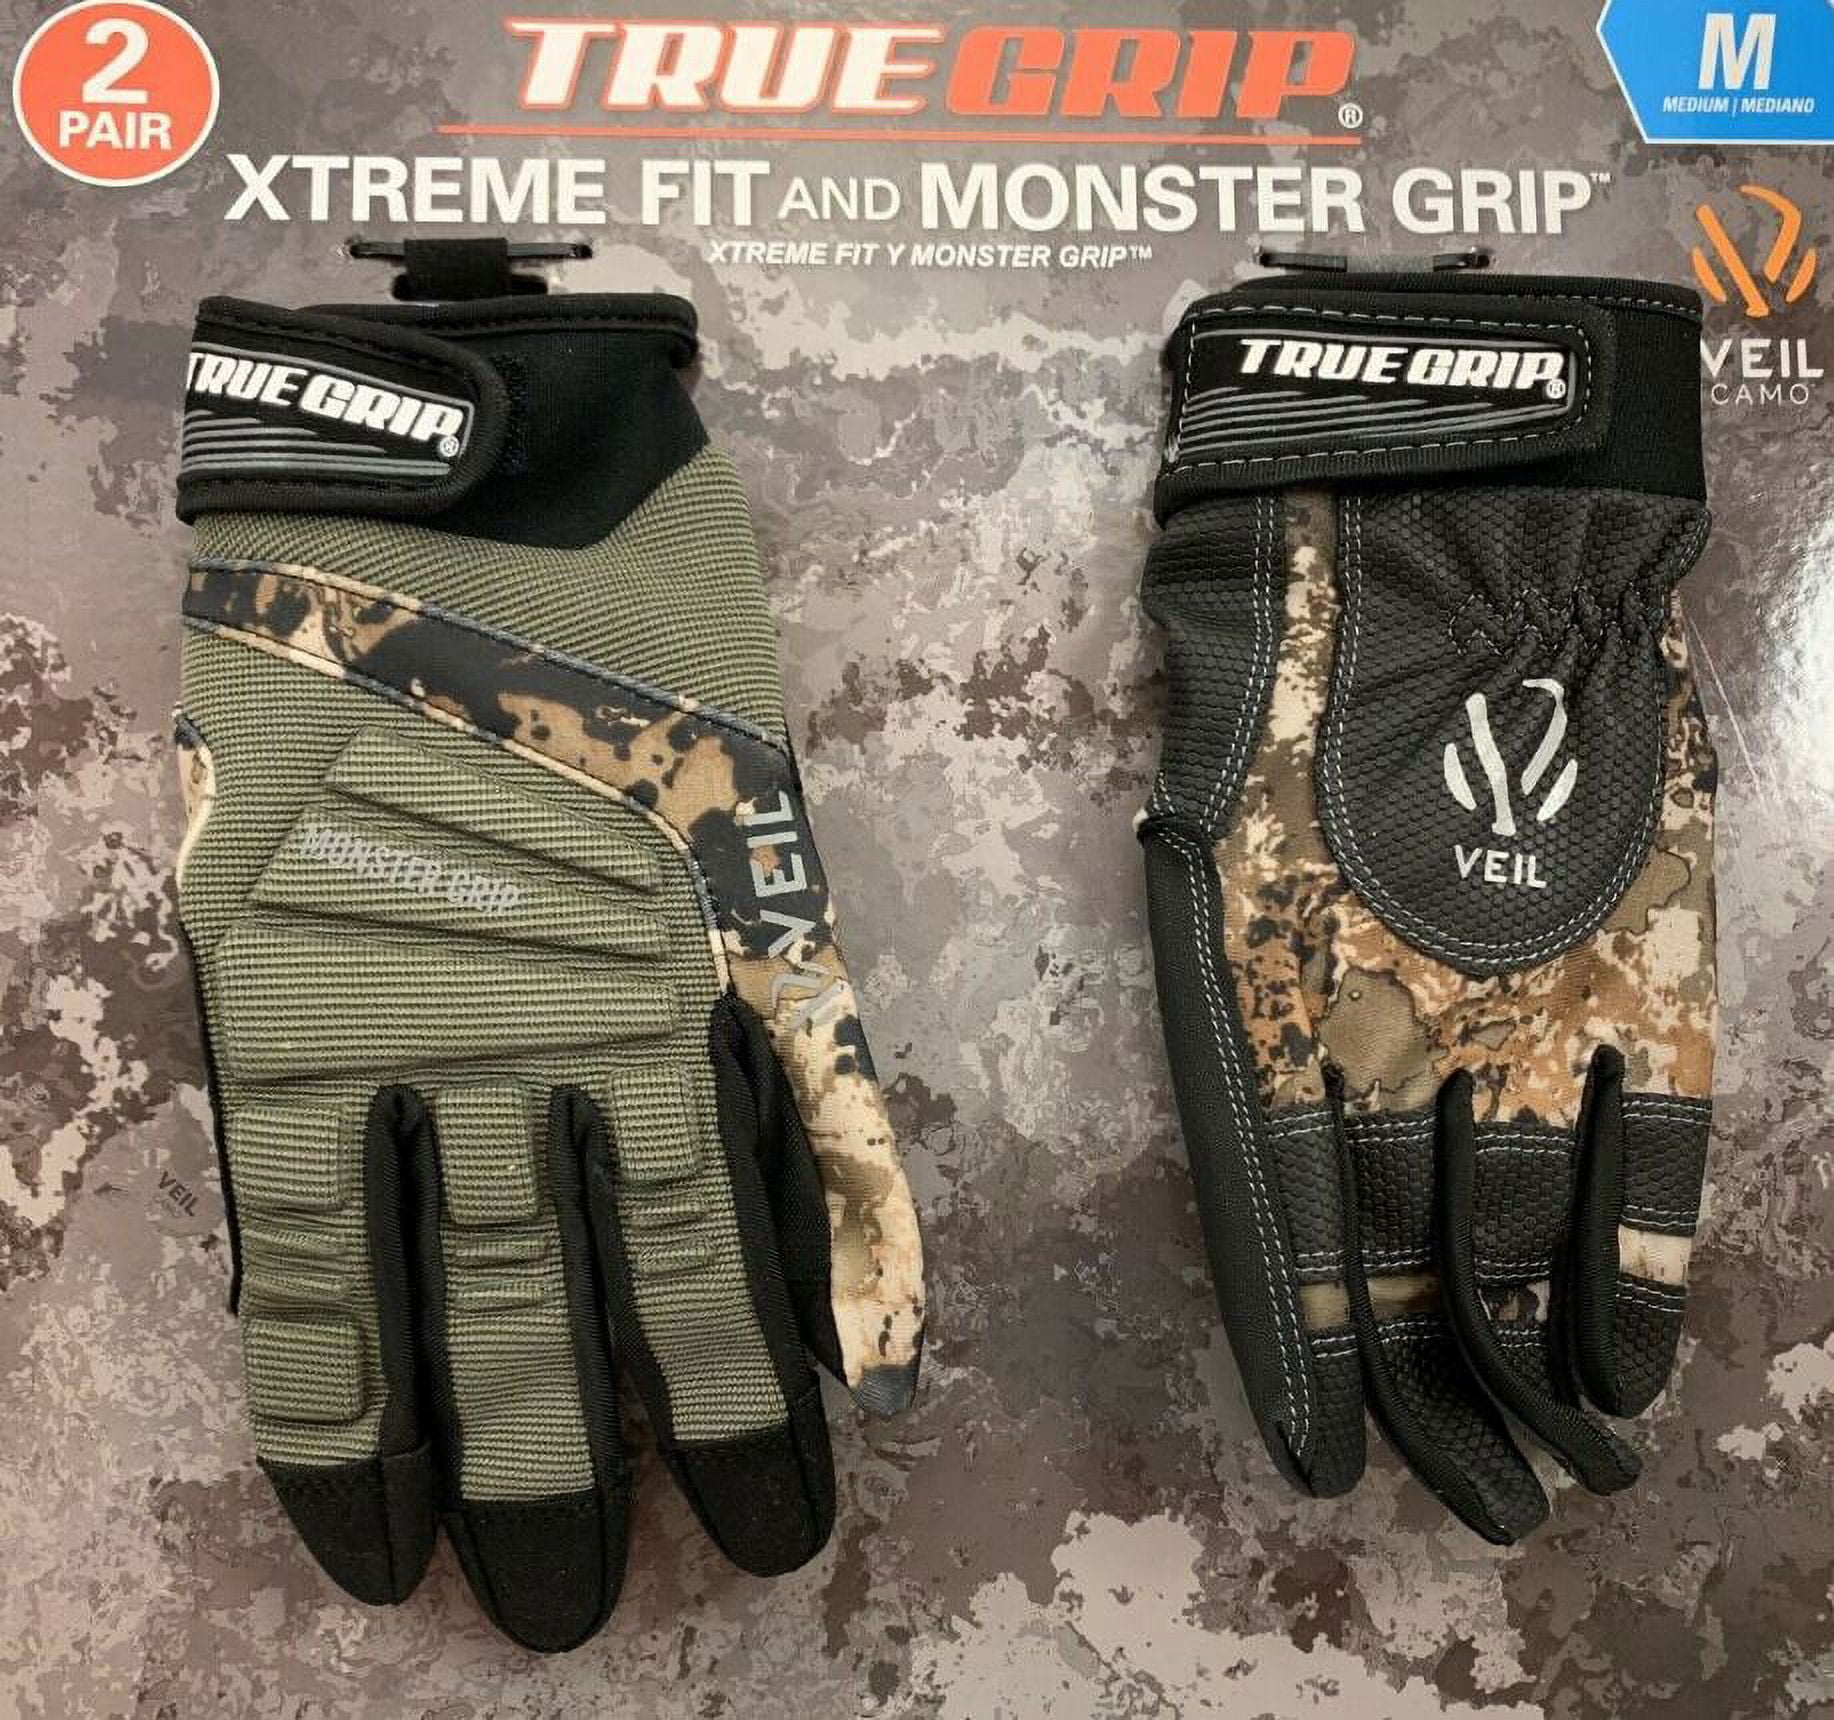 True Grip Camo Gloves, Xtreme Fit Gloves & Monster Grip Gloves, Large, 2  Packs in Veil Camo 